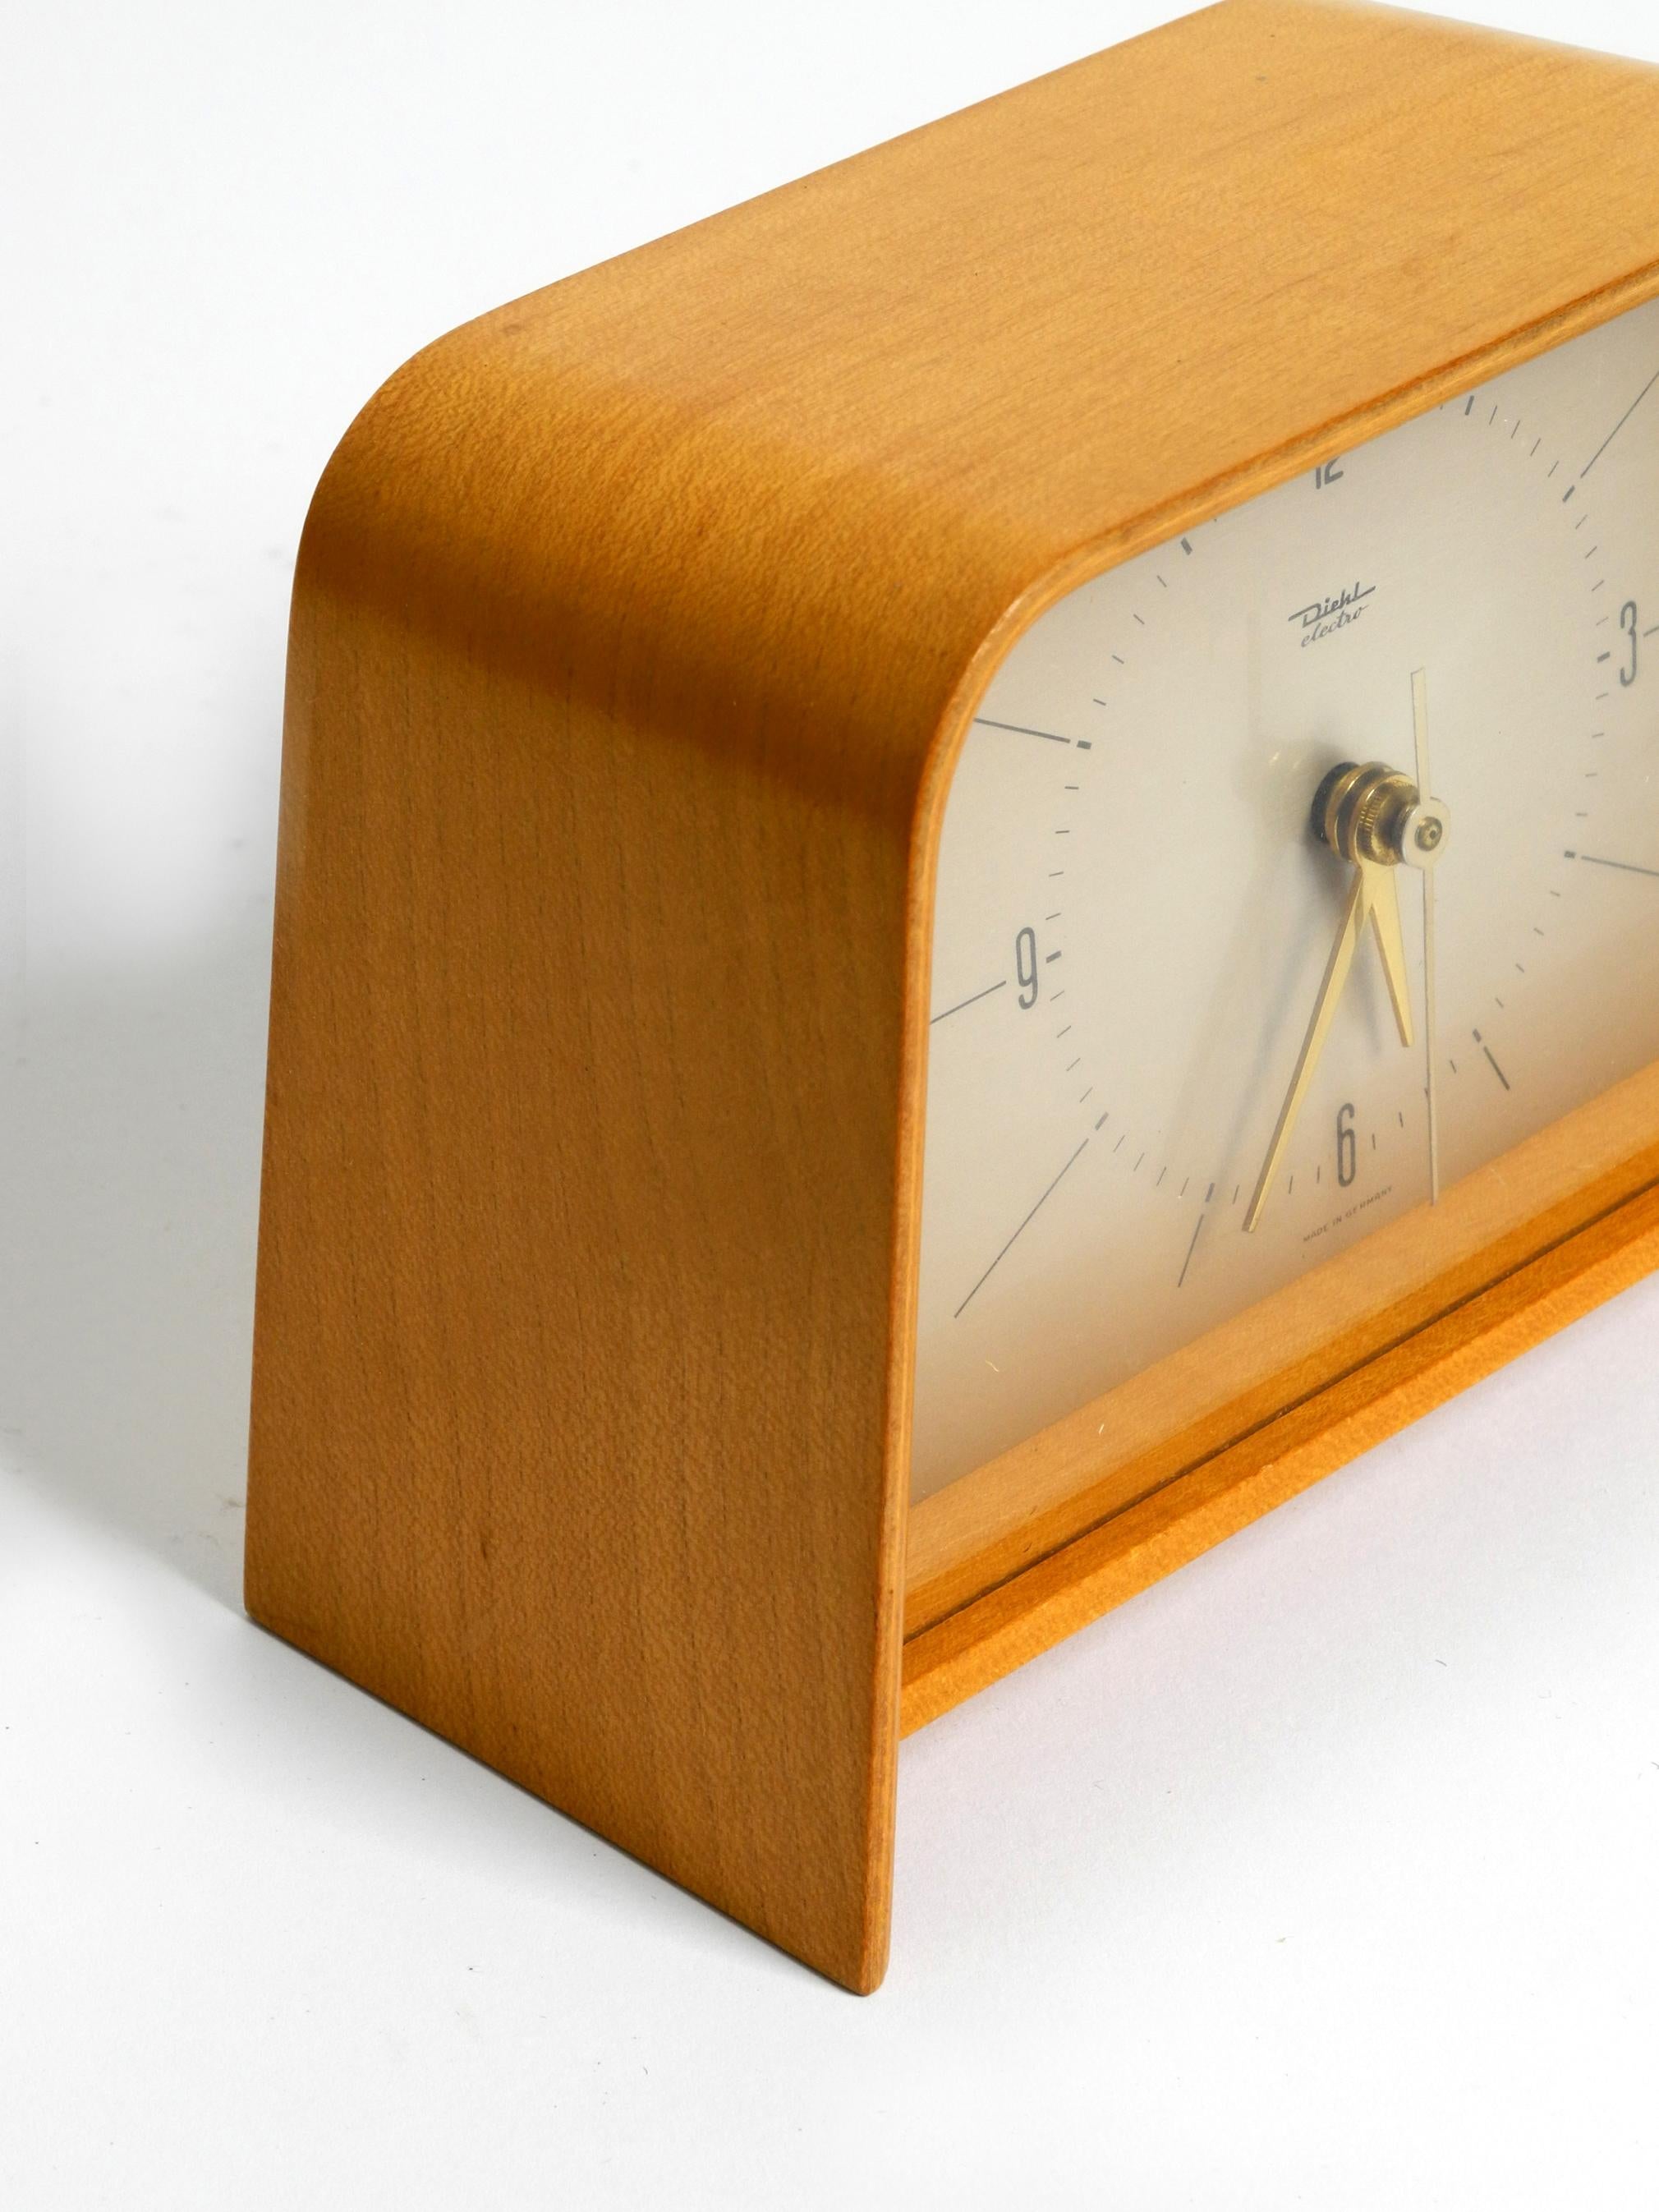 Beautiful original 1950s Diehl Electro table clock with curved teak plywood In Good Condition For Sale In München, DE